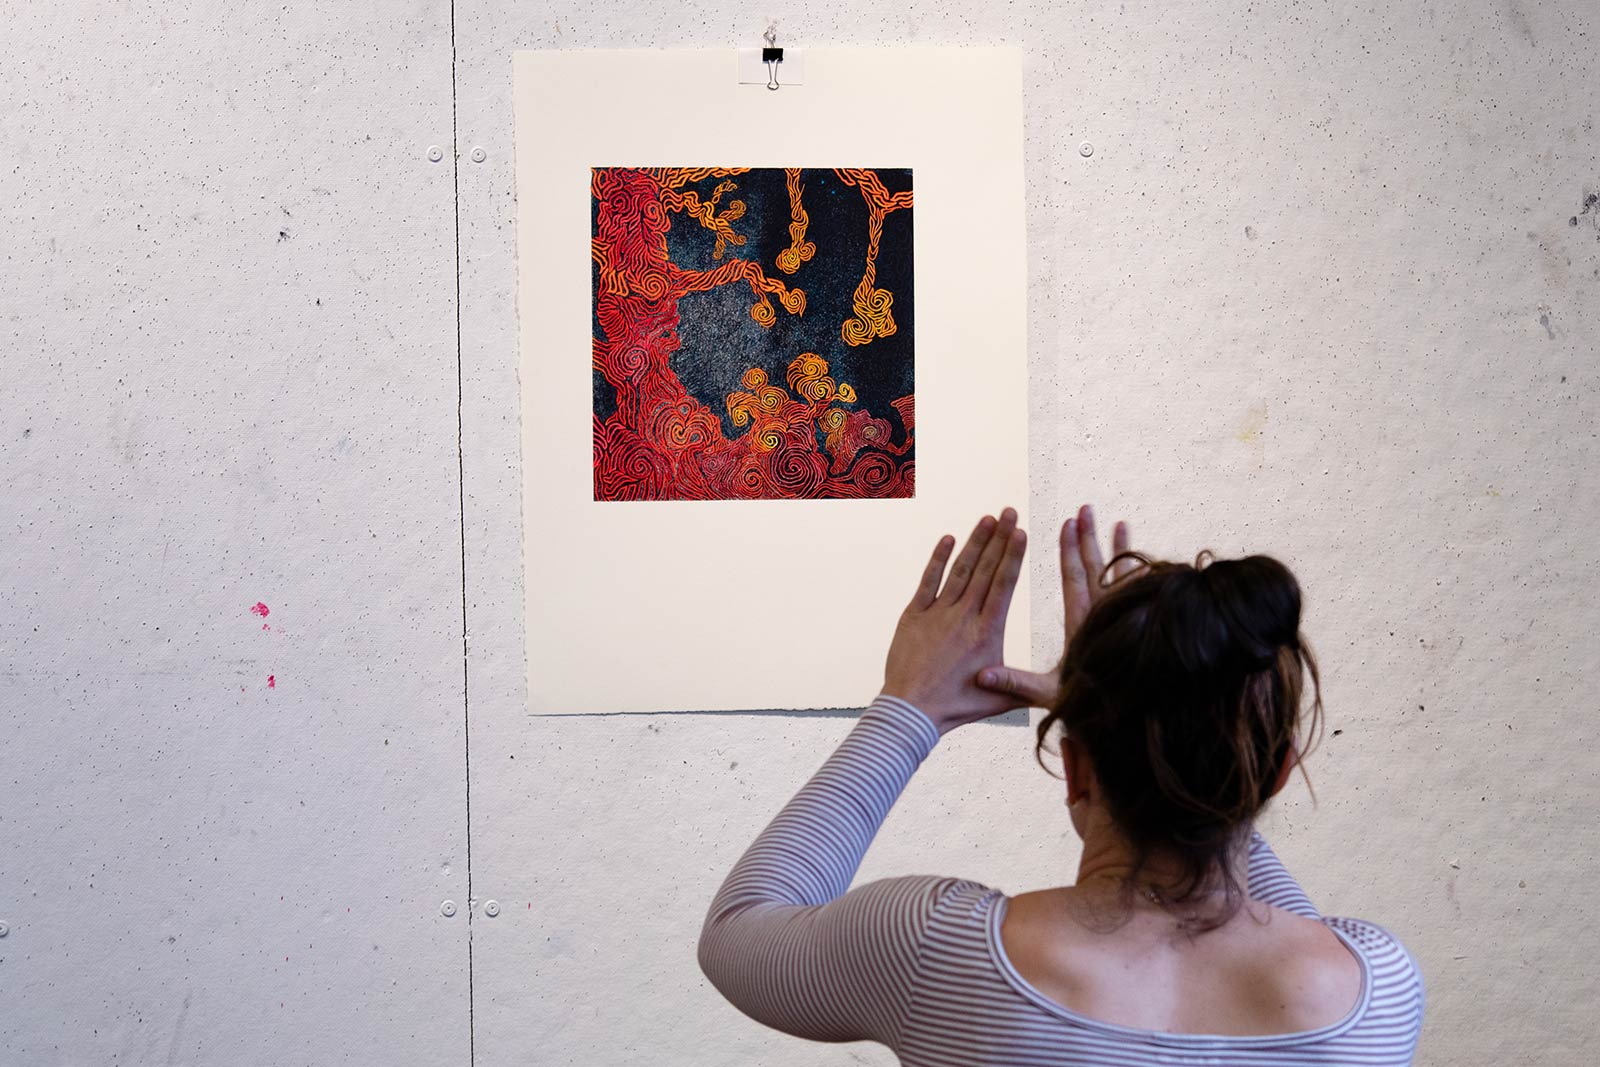 A student examines a print hanging on the wall